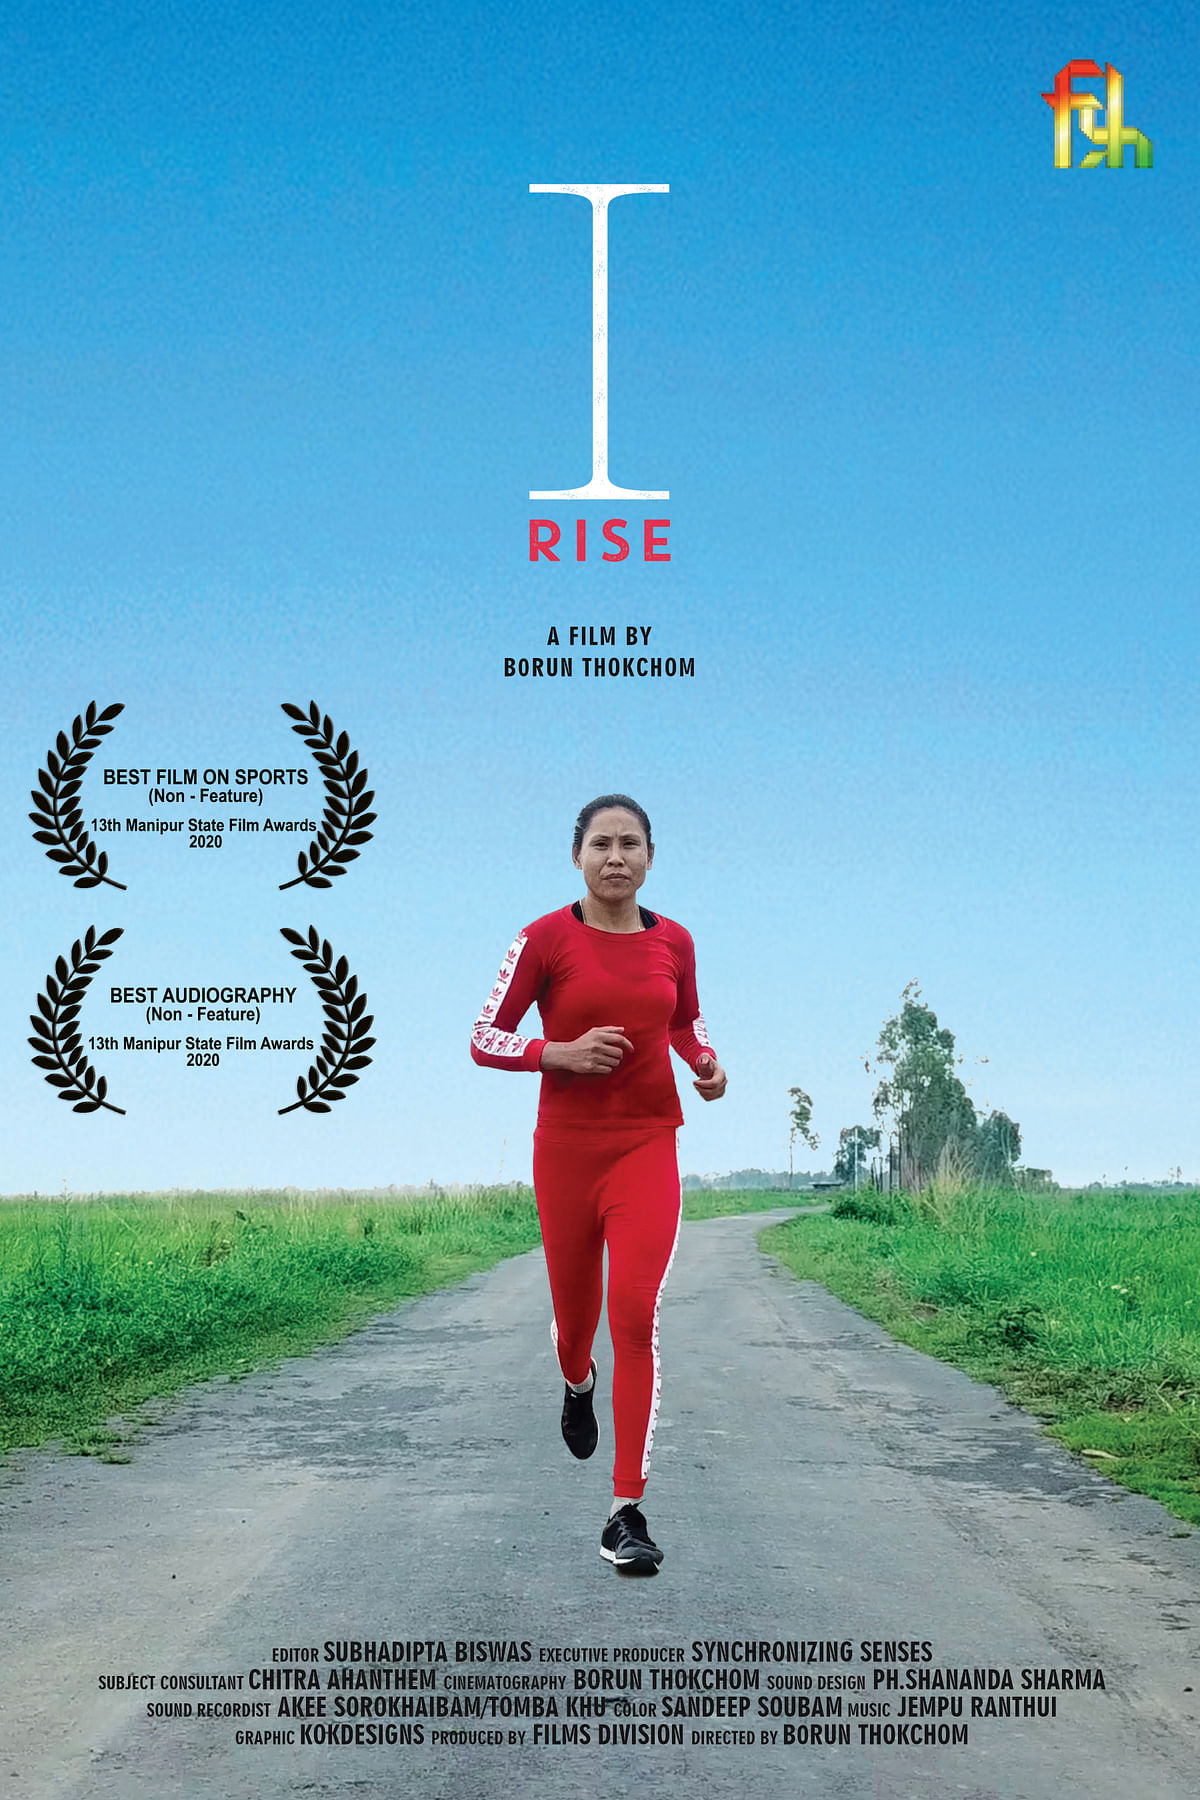 A documentary titled ‘I Rise’ captures the controversial moment in Sarita Devi’s life.